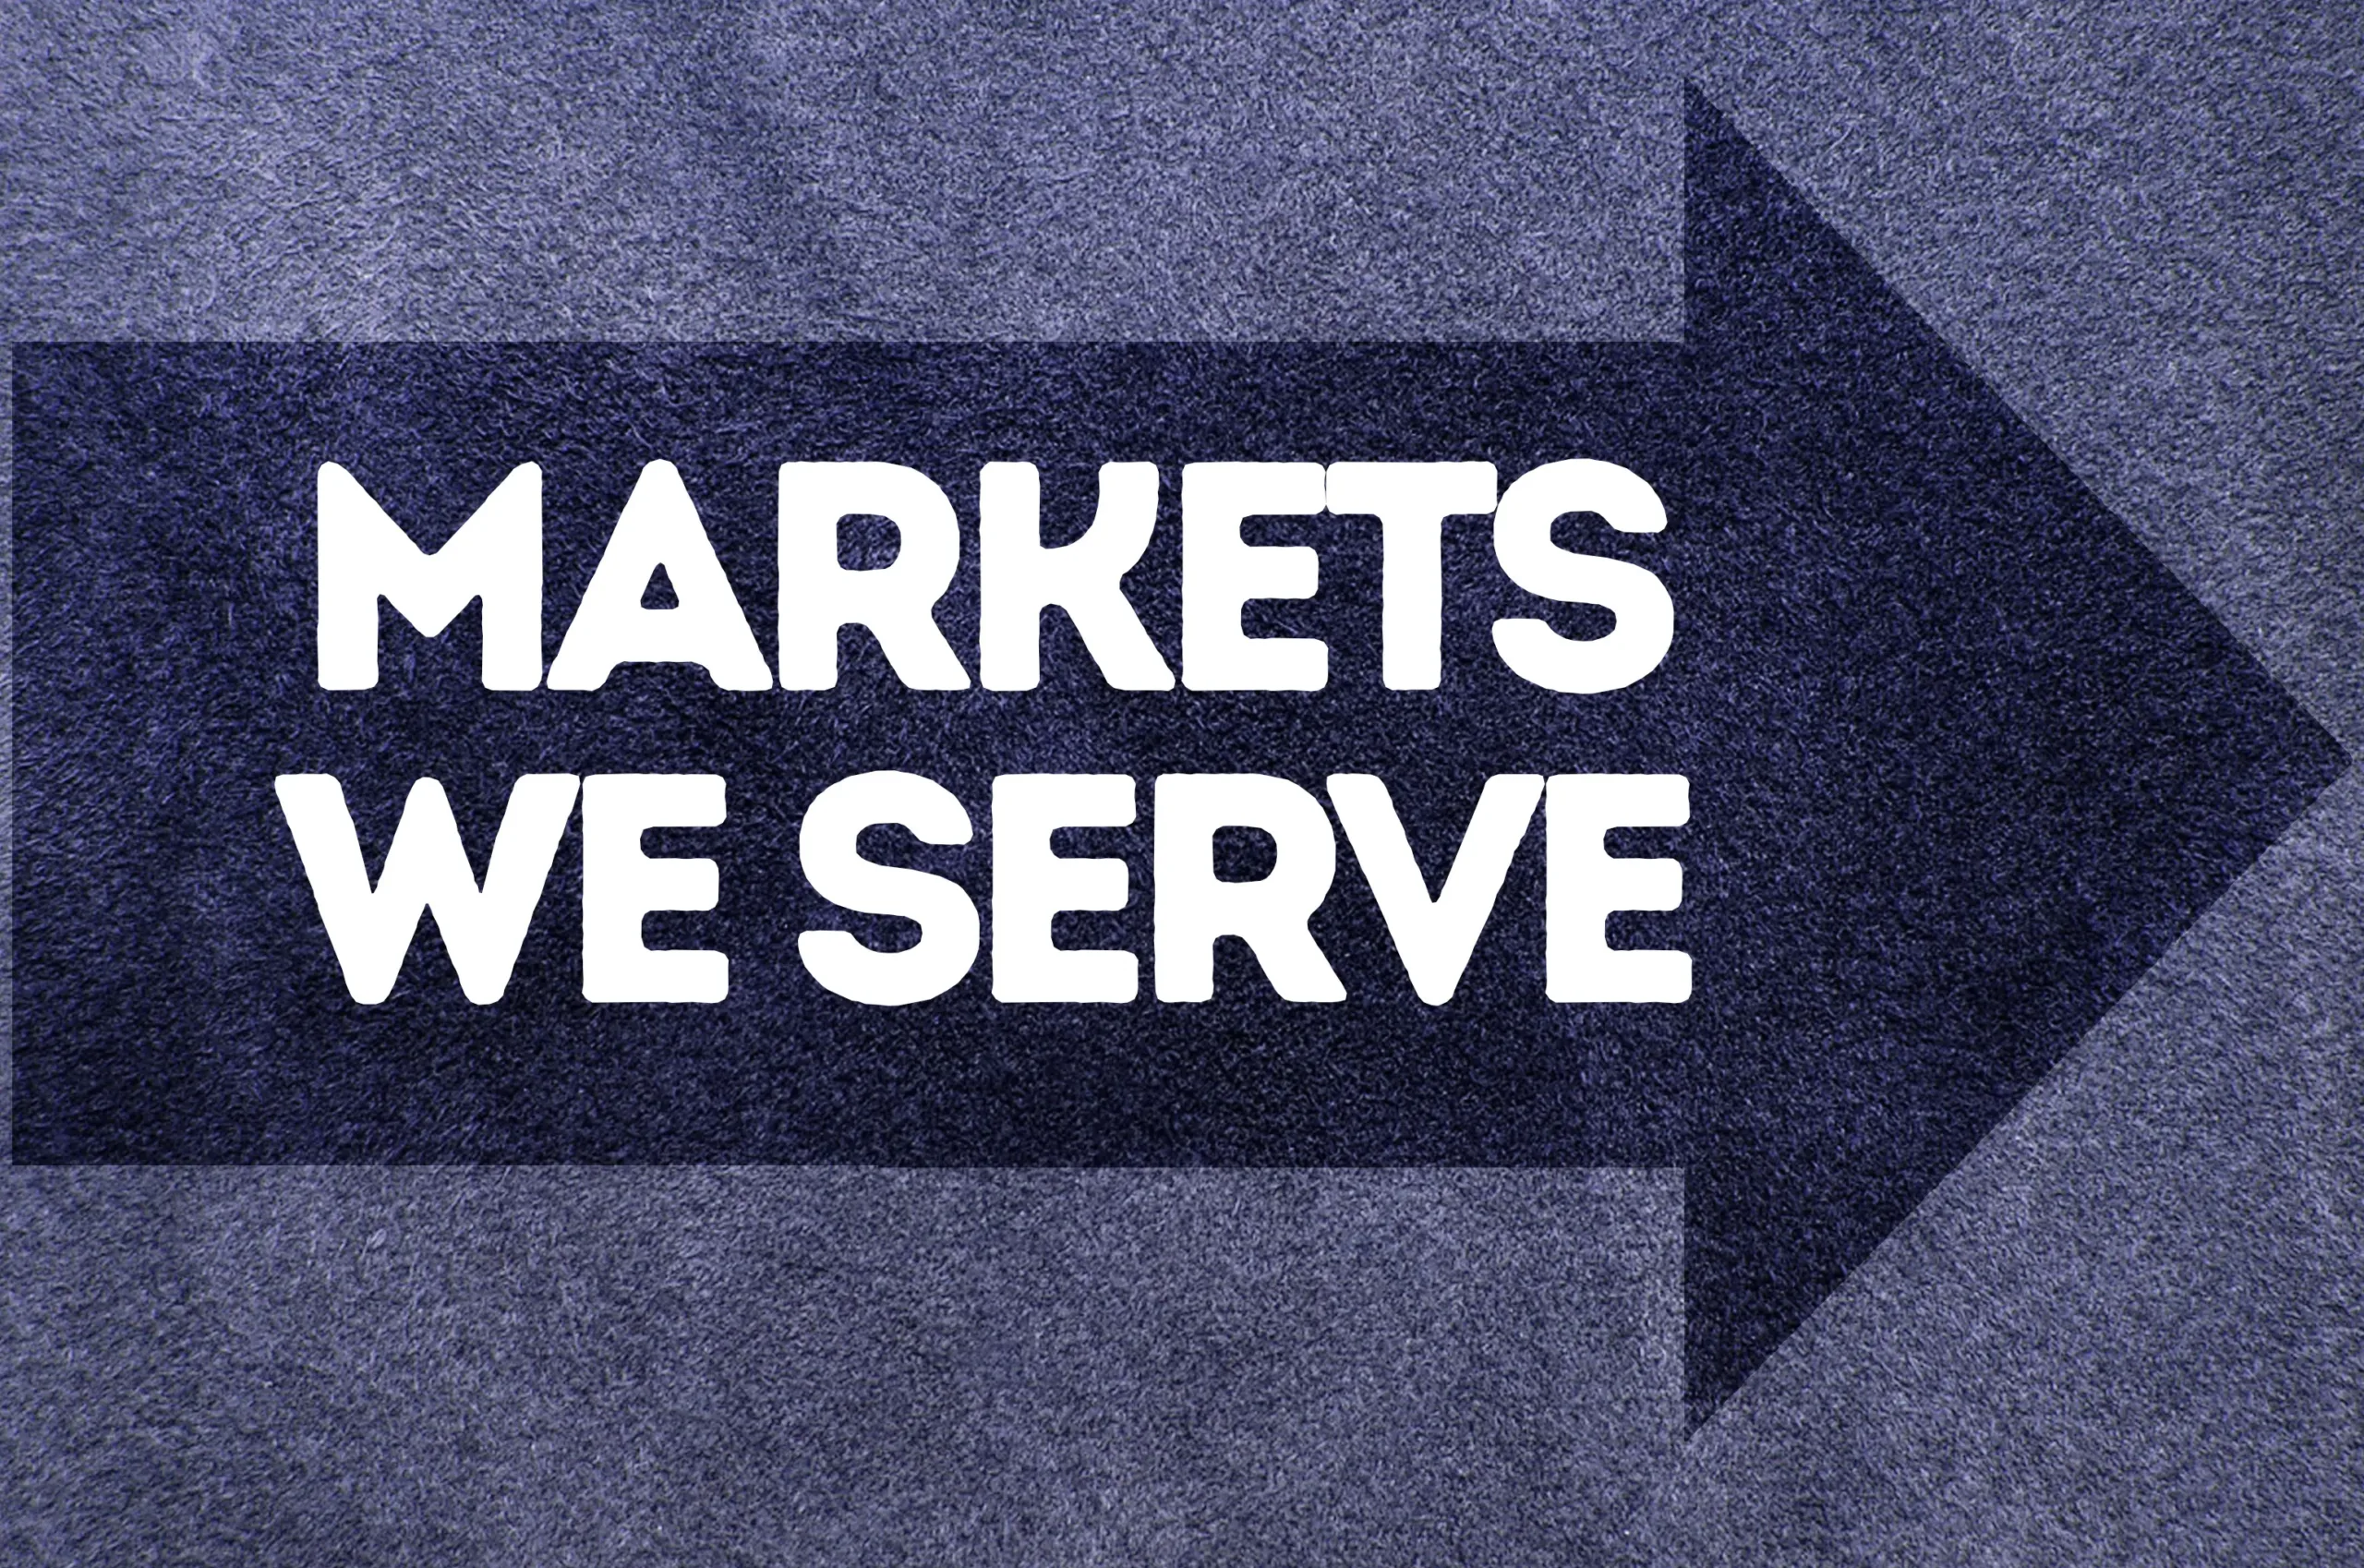 arrow pointing right "Markets we serve."